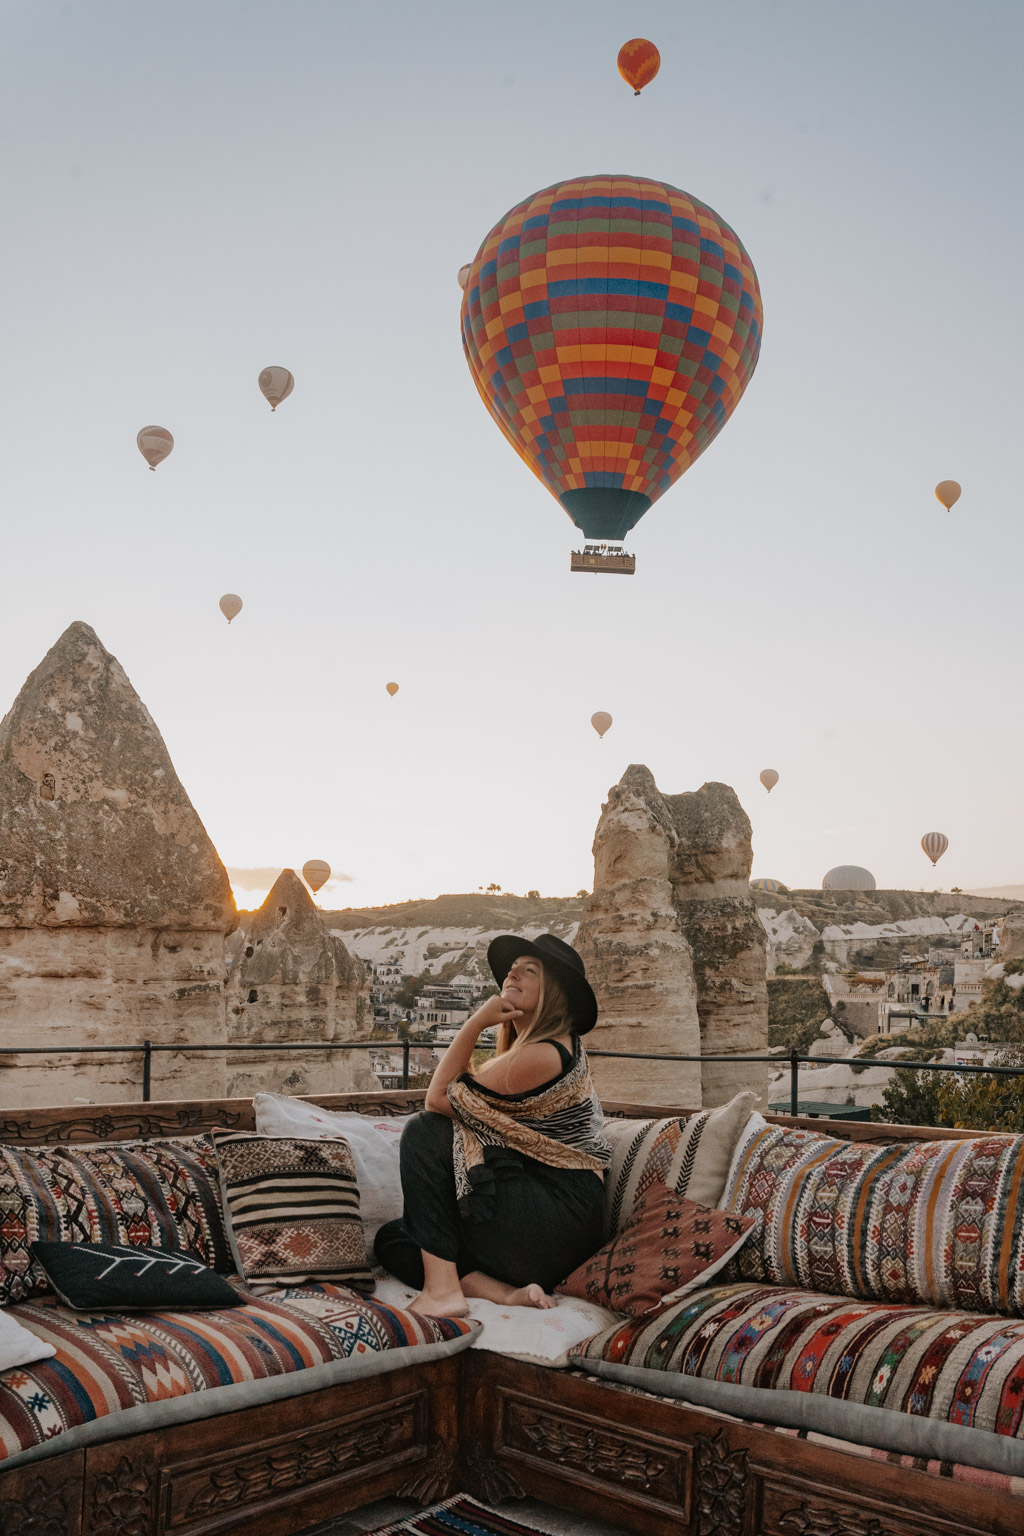 15 Best Hotels in Cappadocia with a View of the Balloons